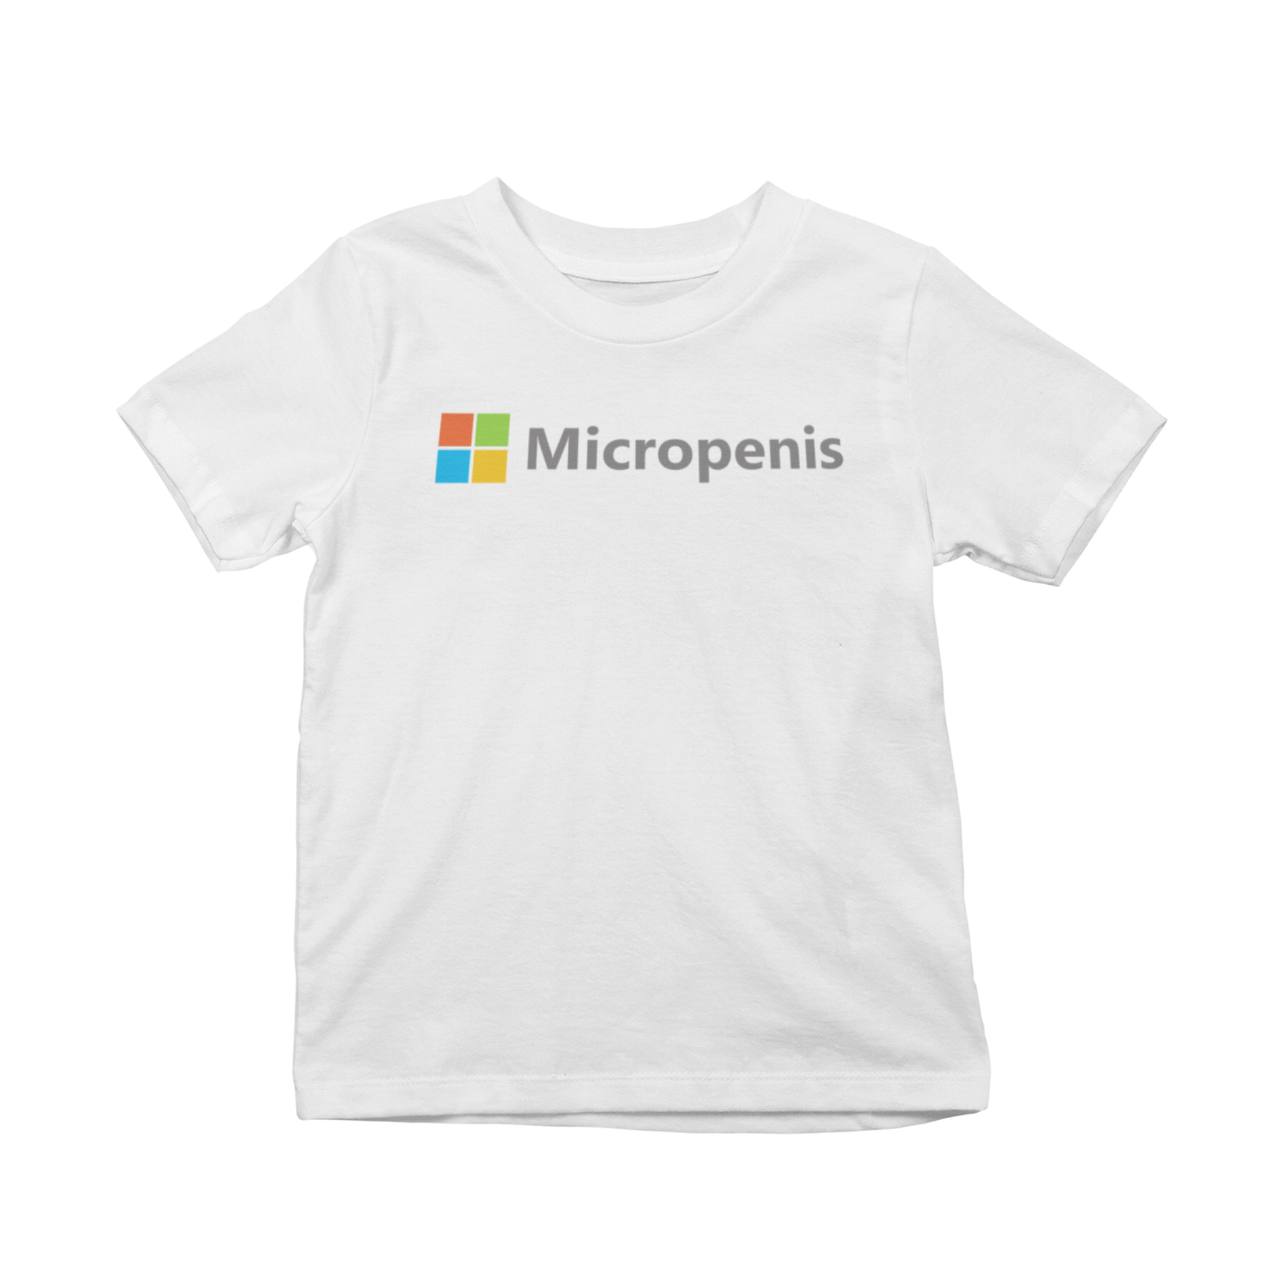 Micropenis T-Shirt